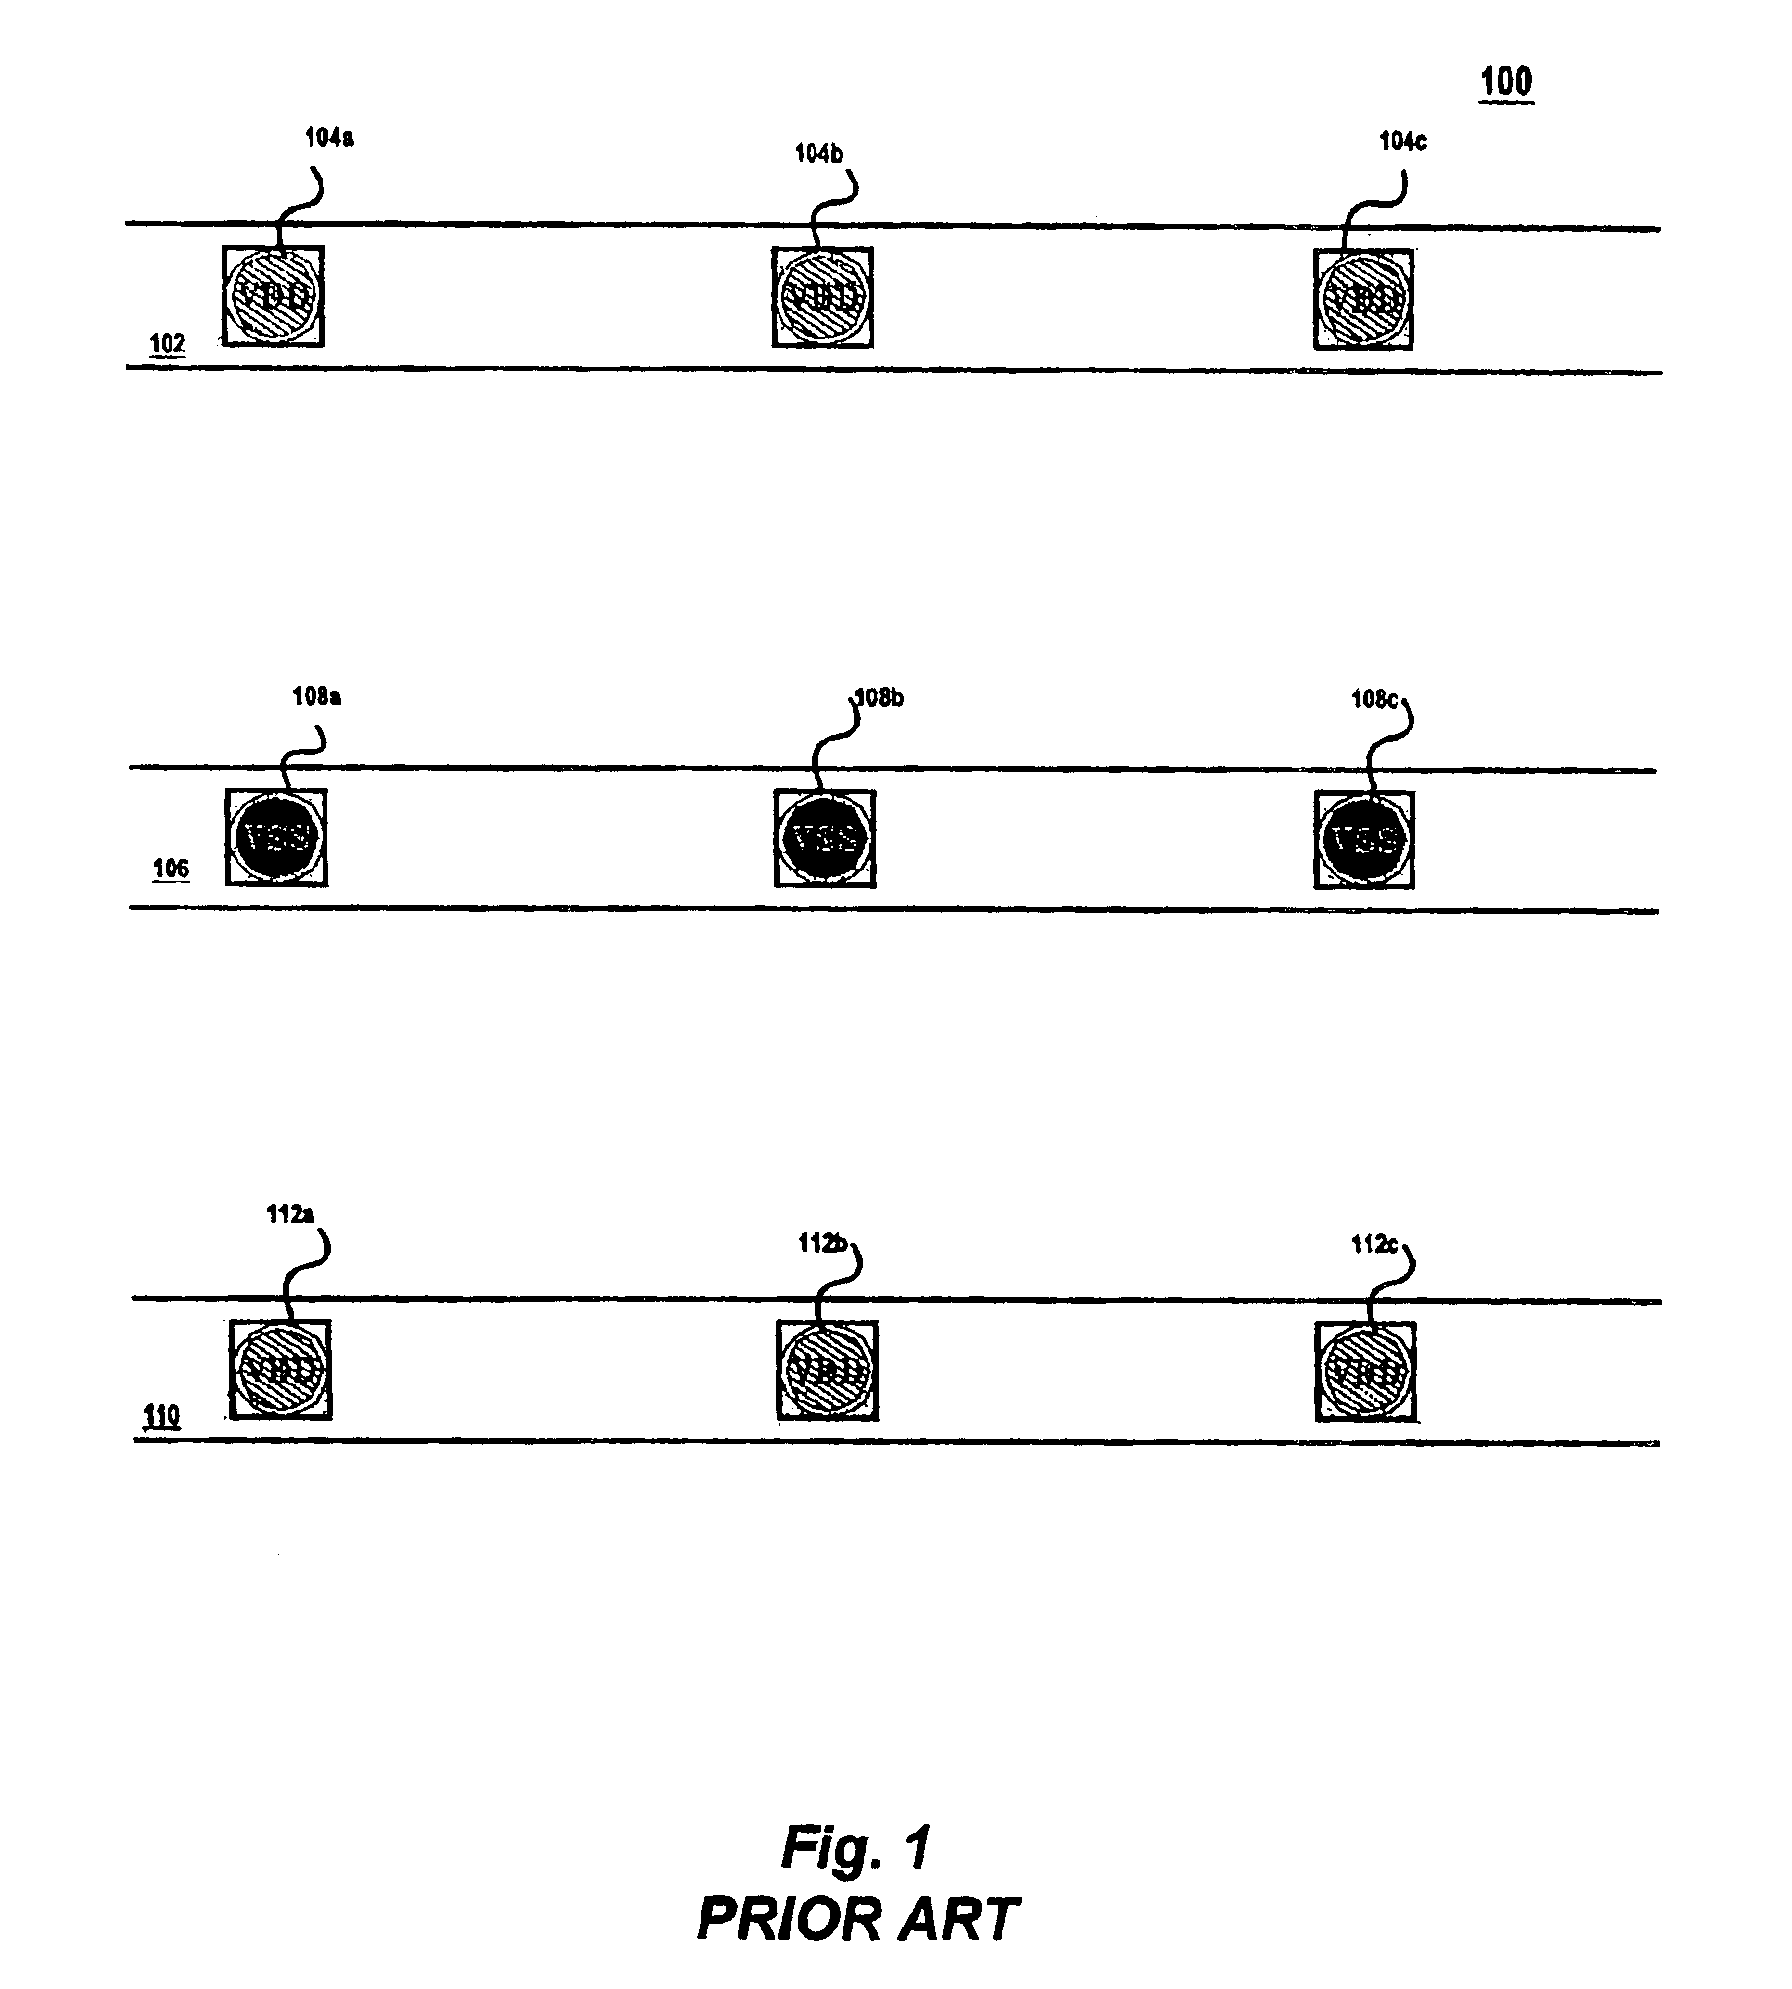 Power grid and bump pattern with reduced inductance and resistance